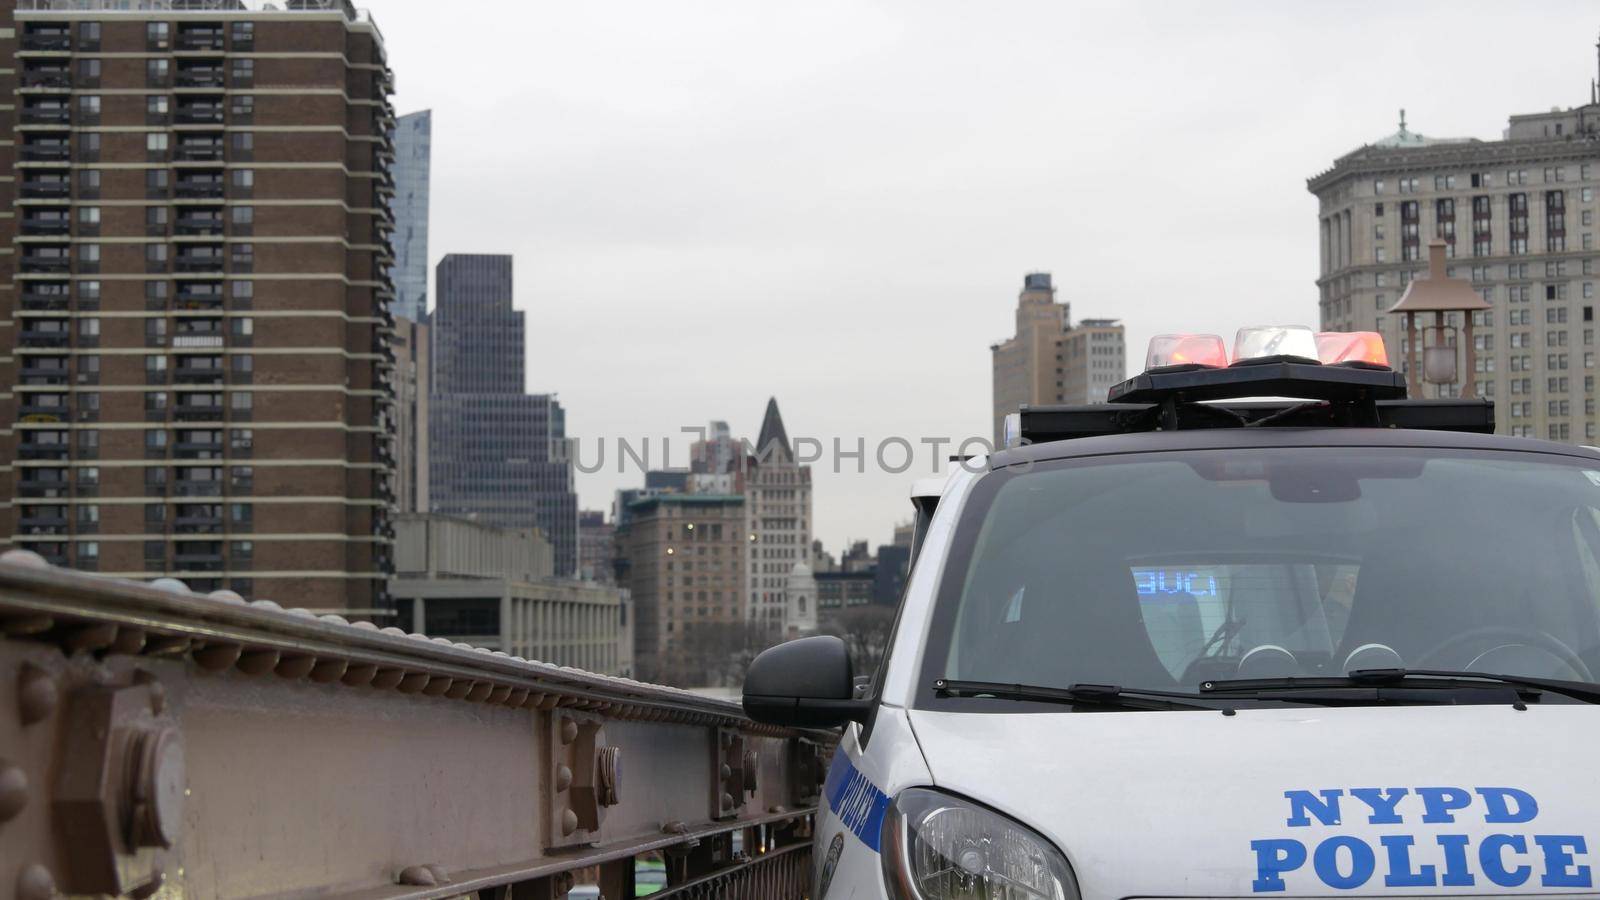 NEW YORK CITY, USA - 12 MAR 2020: Emergency siren glowing, 991 police patrol car on Brooklyn bridge. NYPD auto, symbol of crime prevention and safety in Manhattan. Metropolis security and protection by DogoraSun